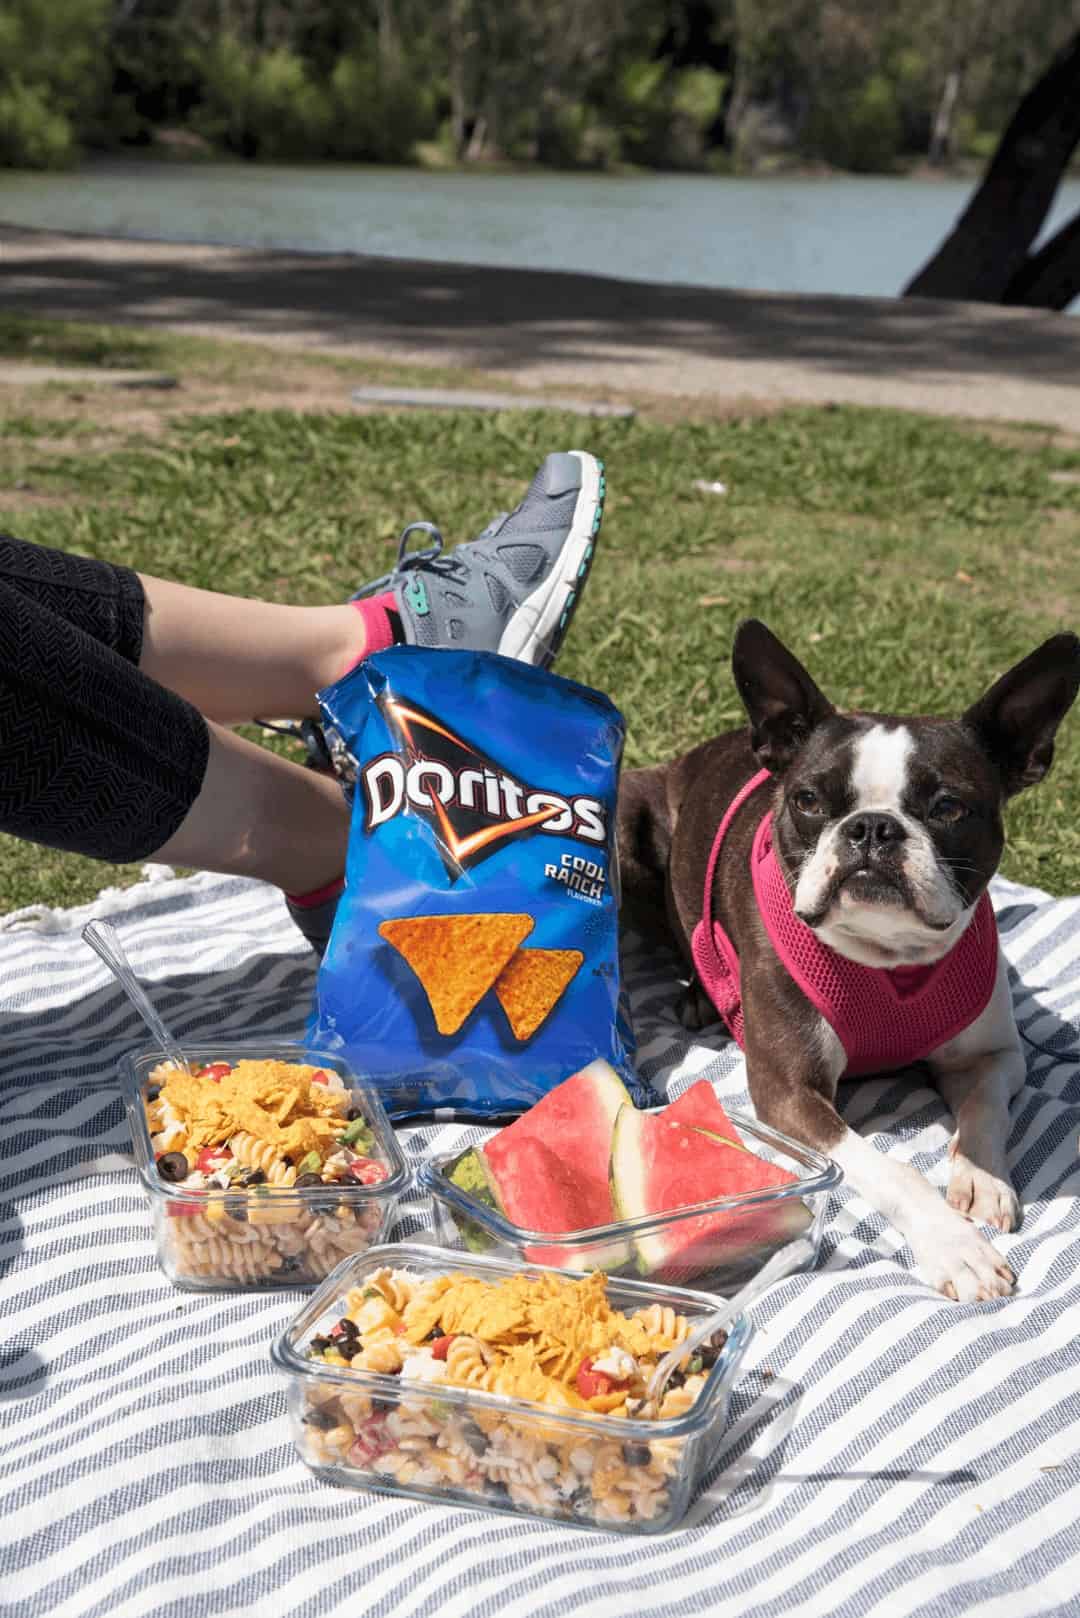 Bridget looks at the camera as she lies next to a bag of Doritos on a picnic blanket.